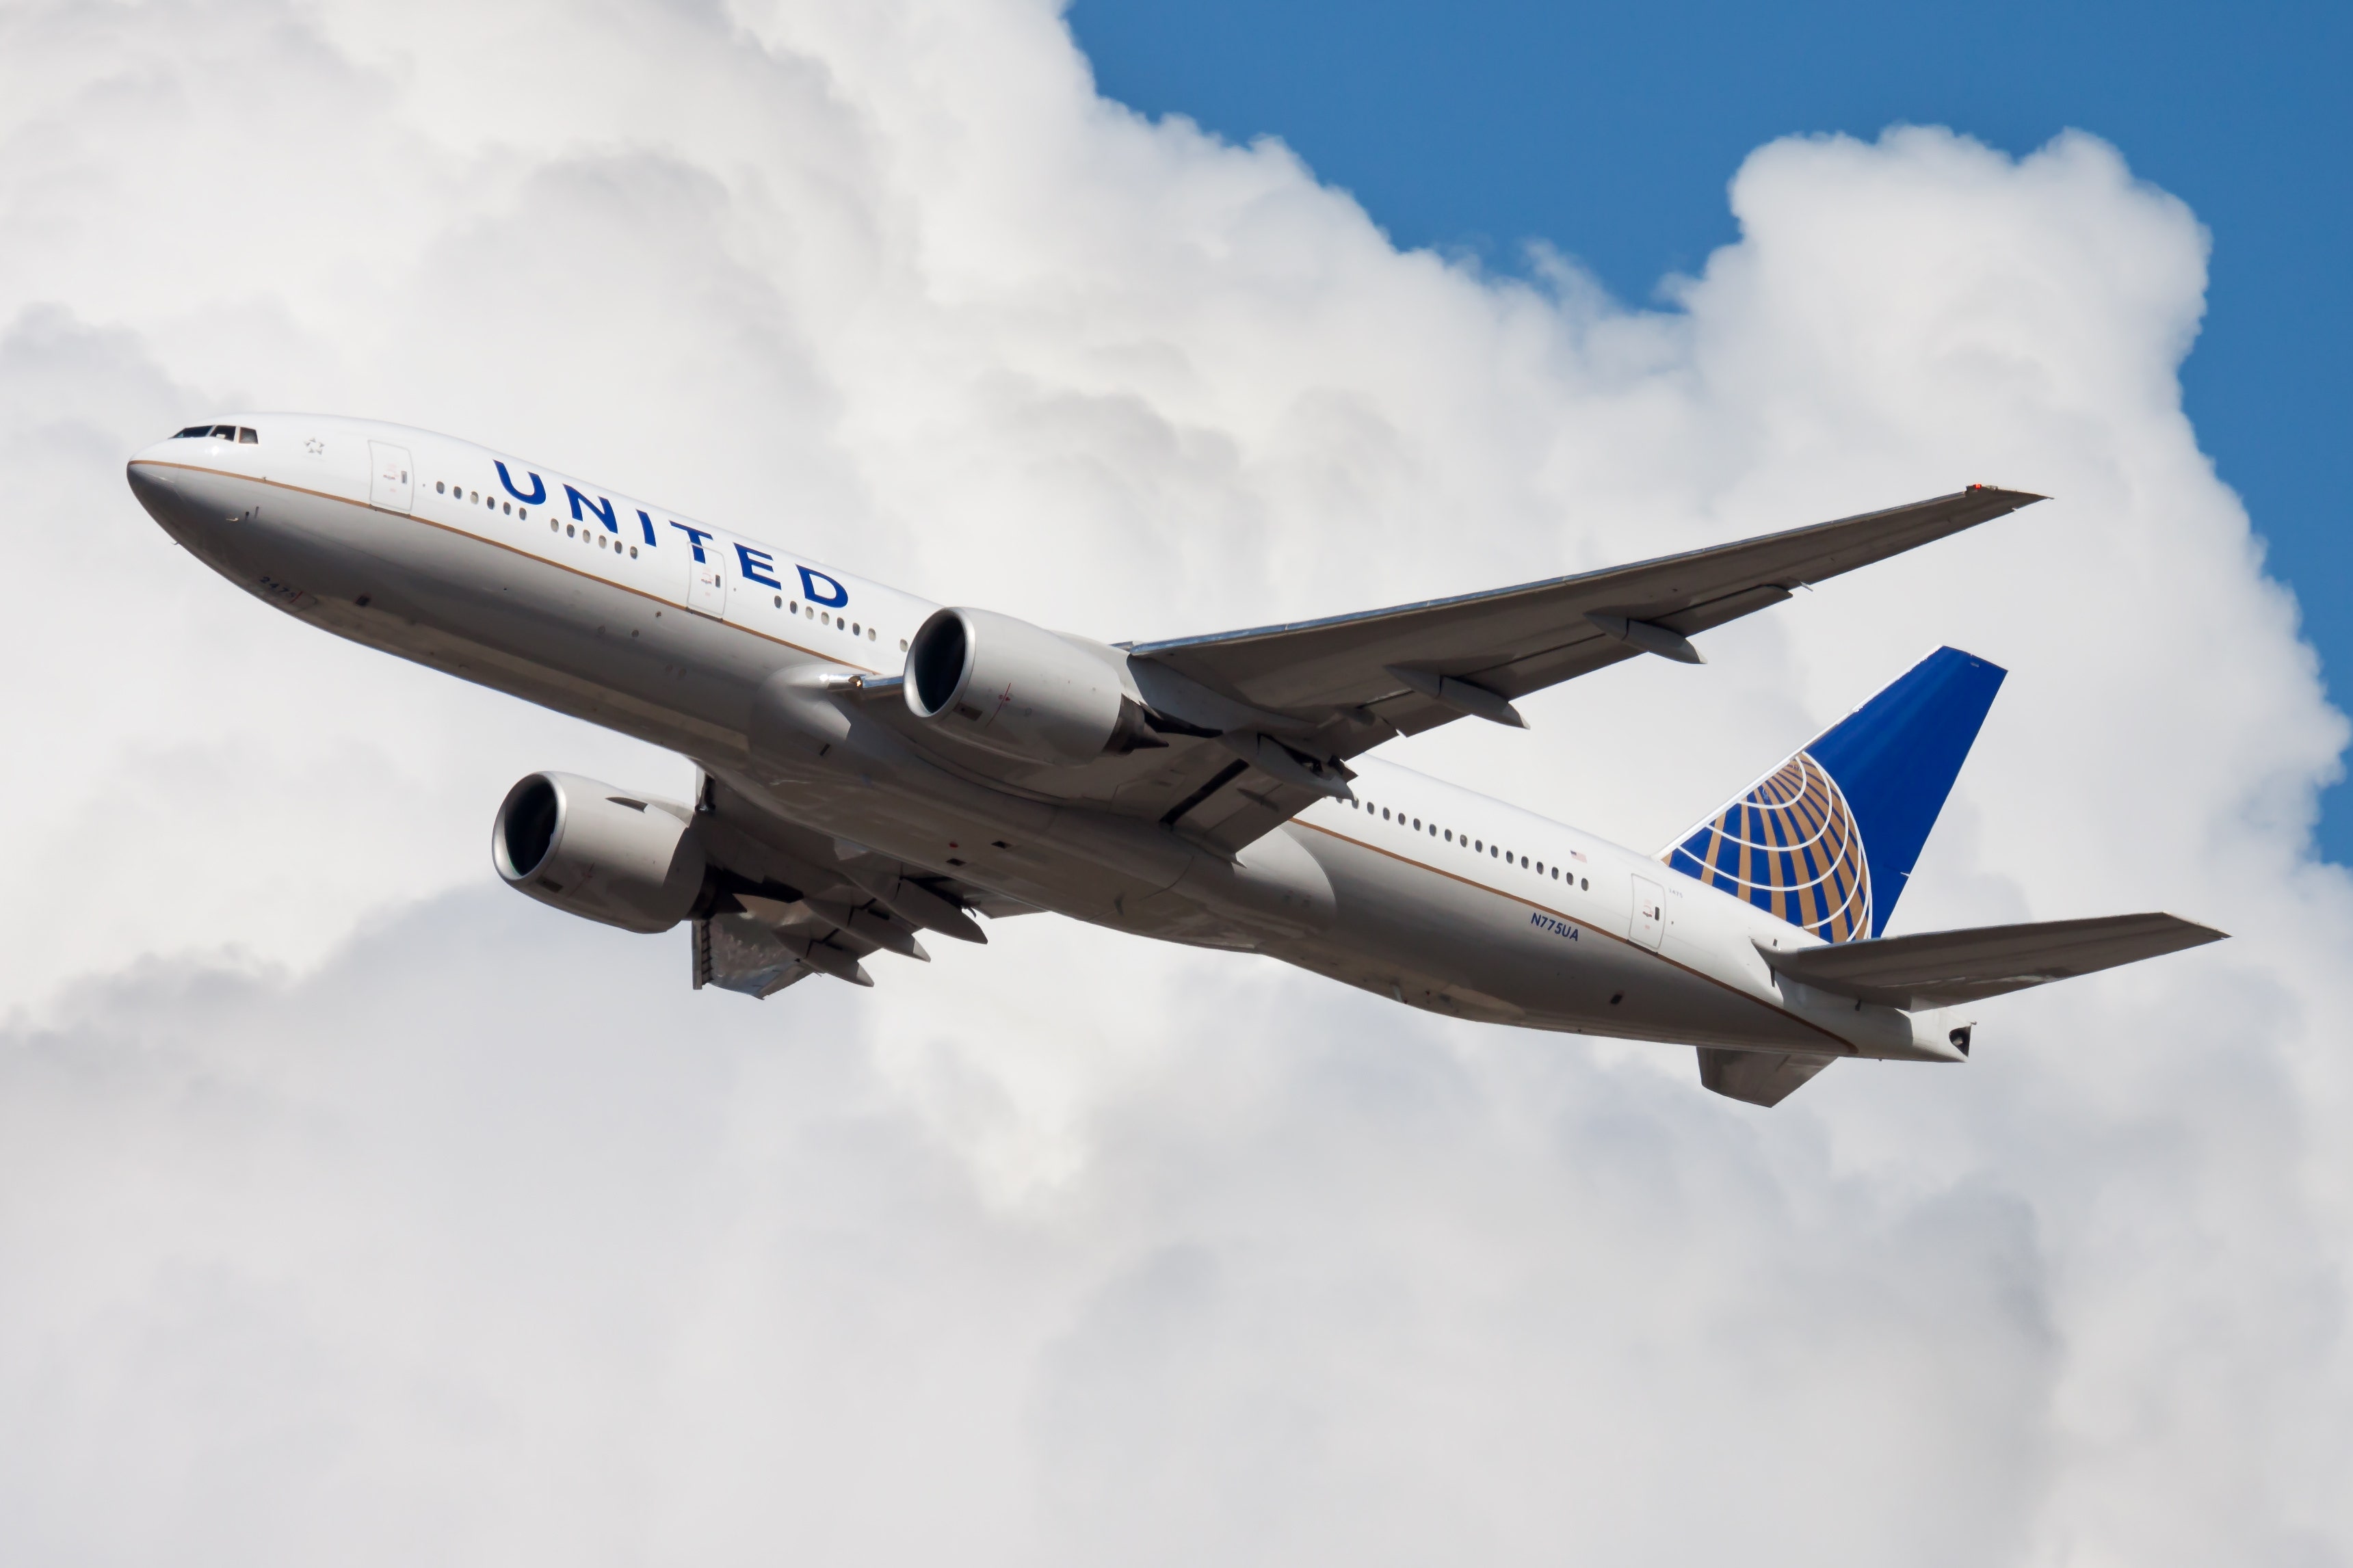 United Airlines returning flight schedule to prepandemic levels in